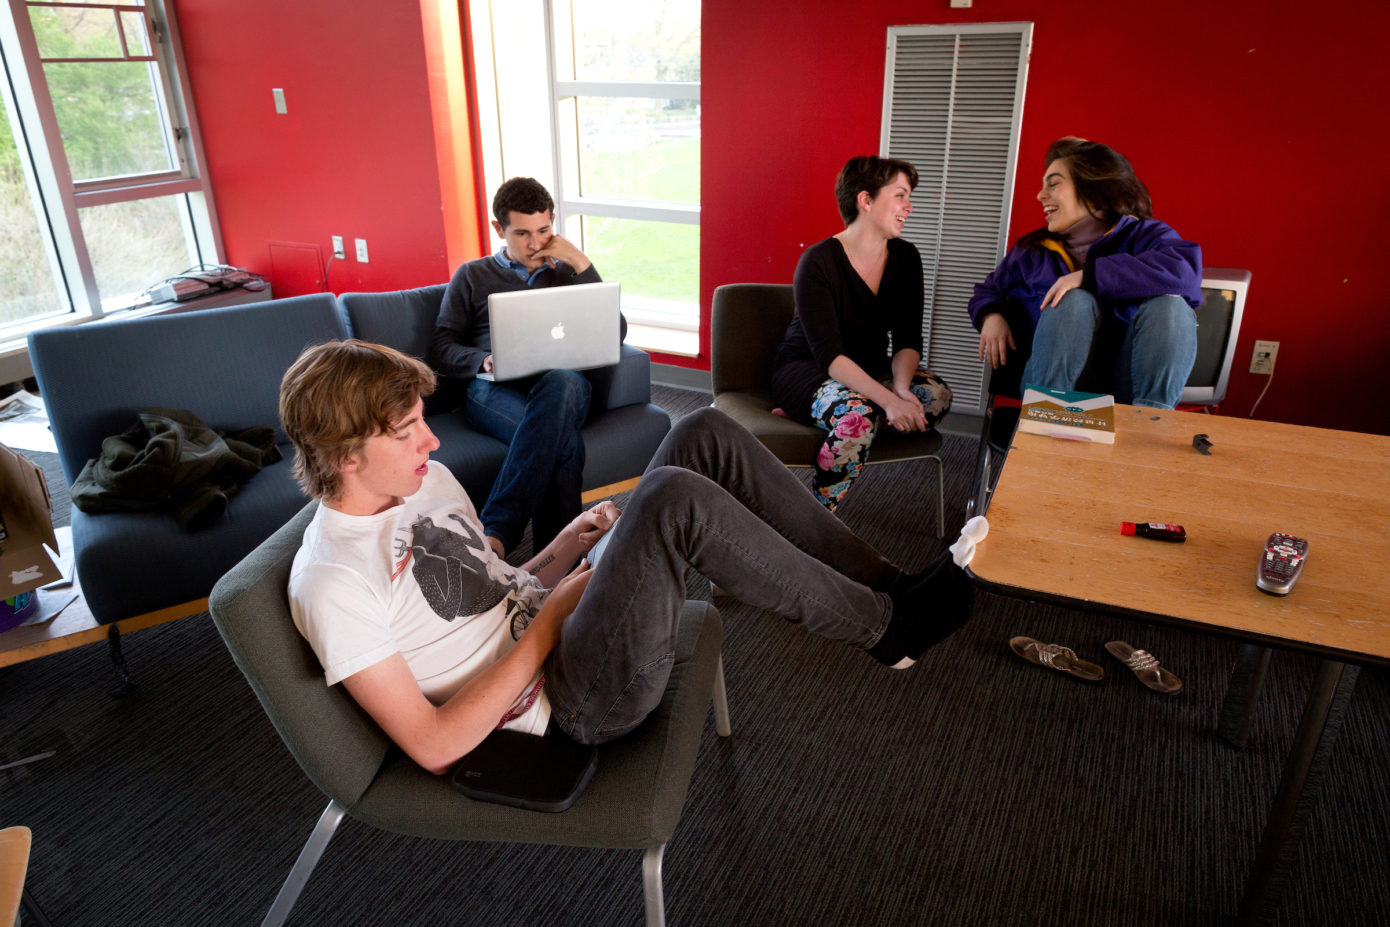 Swarthmore College students sitting in a dorm room reading on laptop computers and other devices.